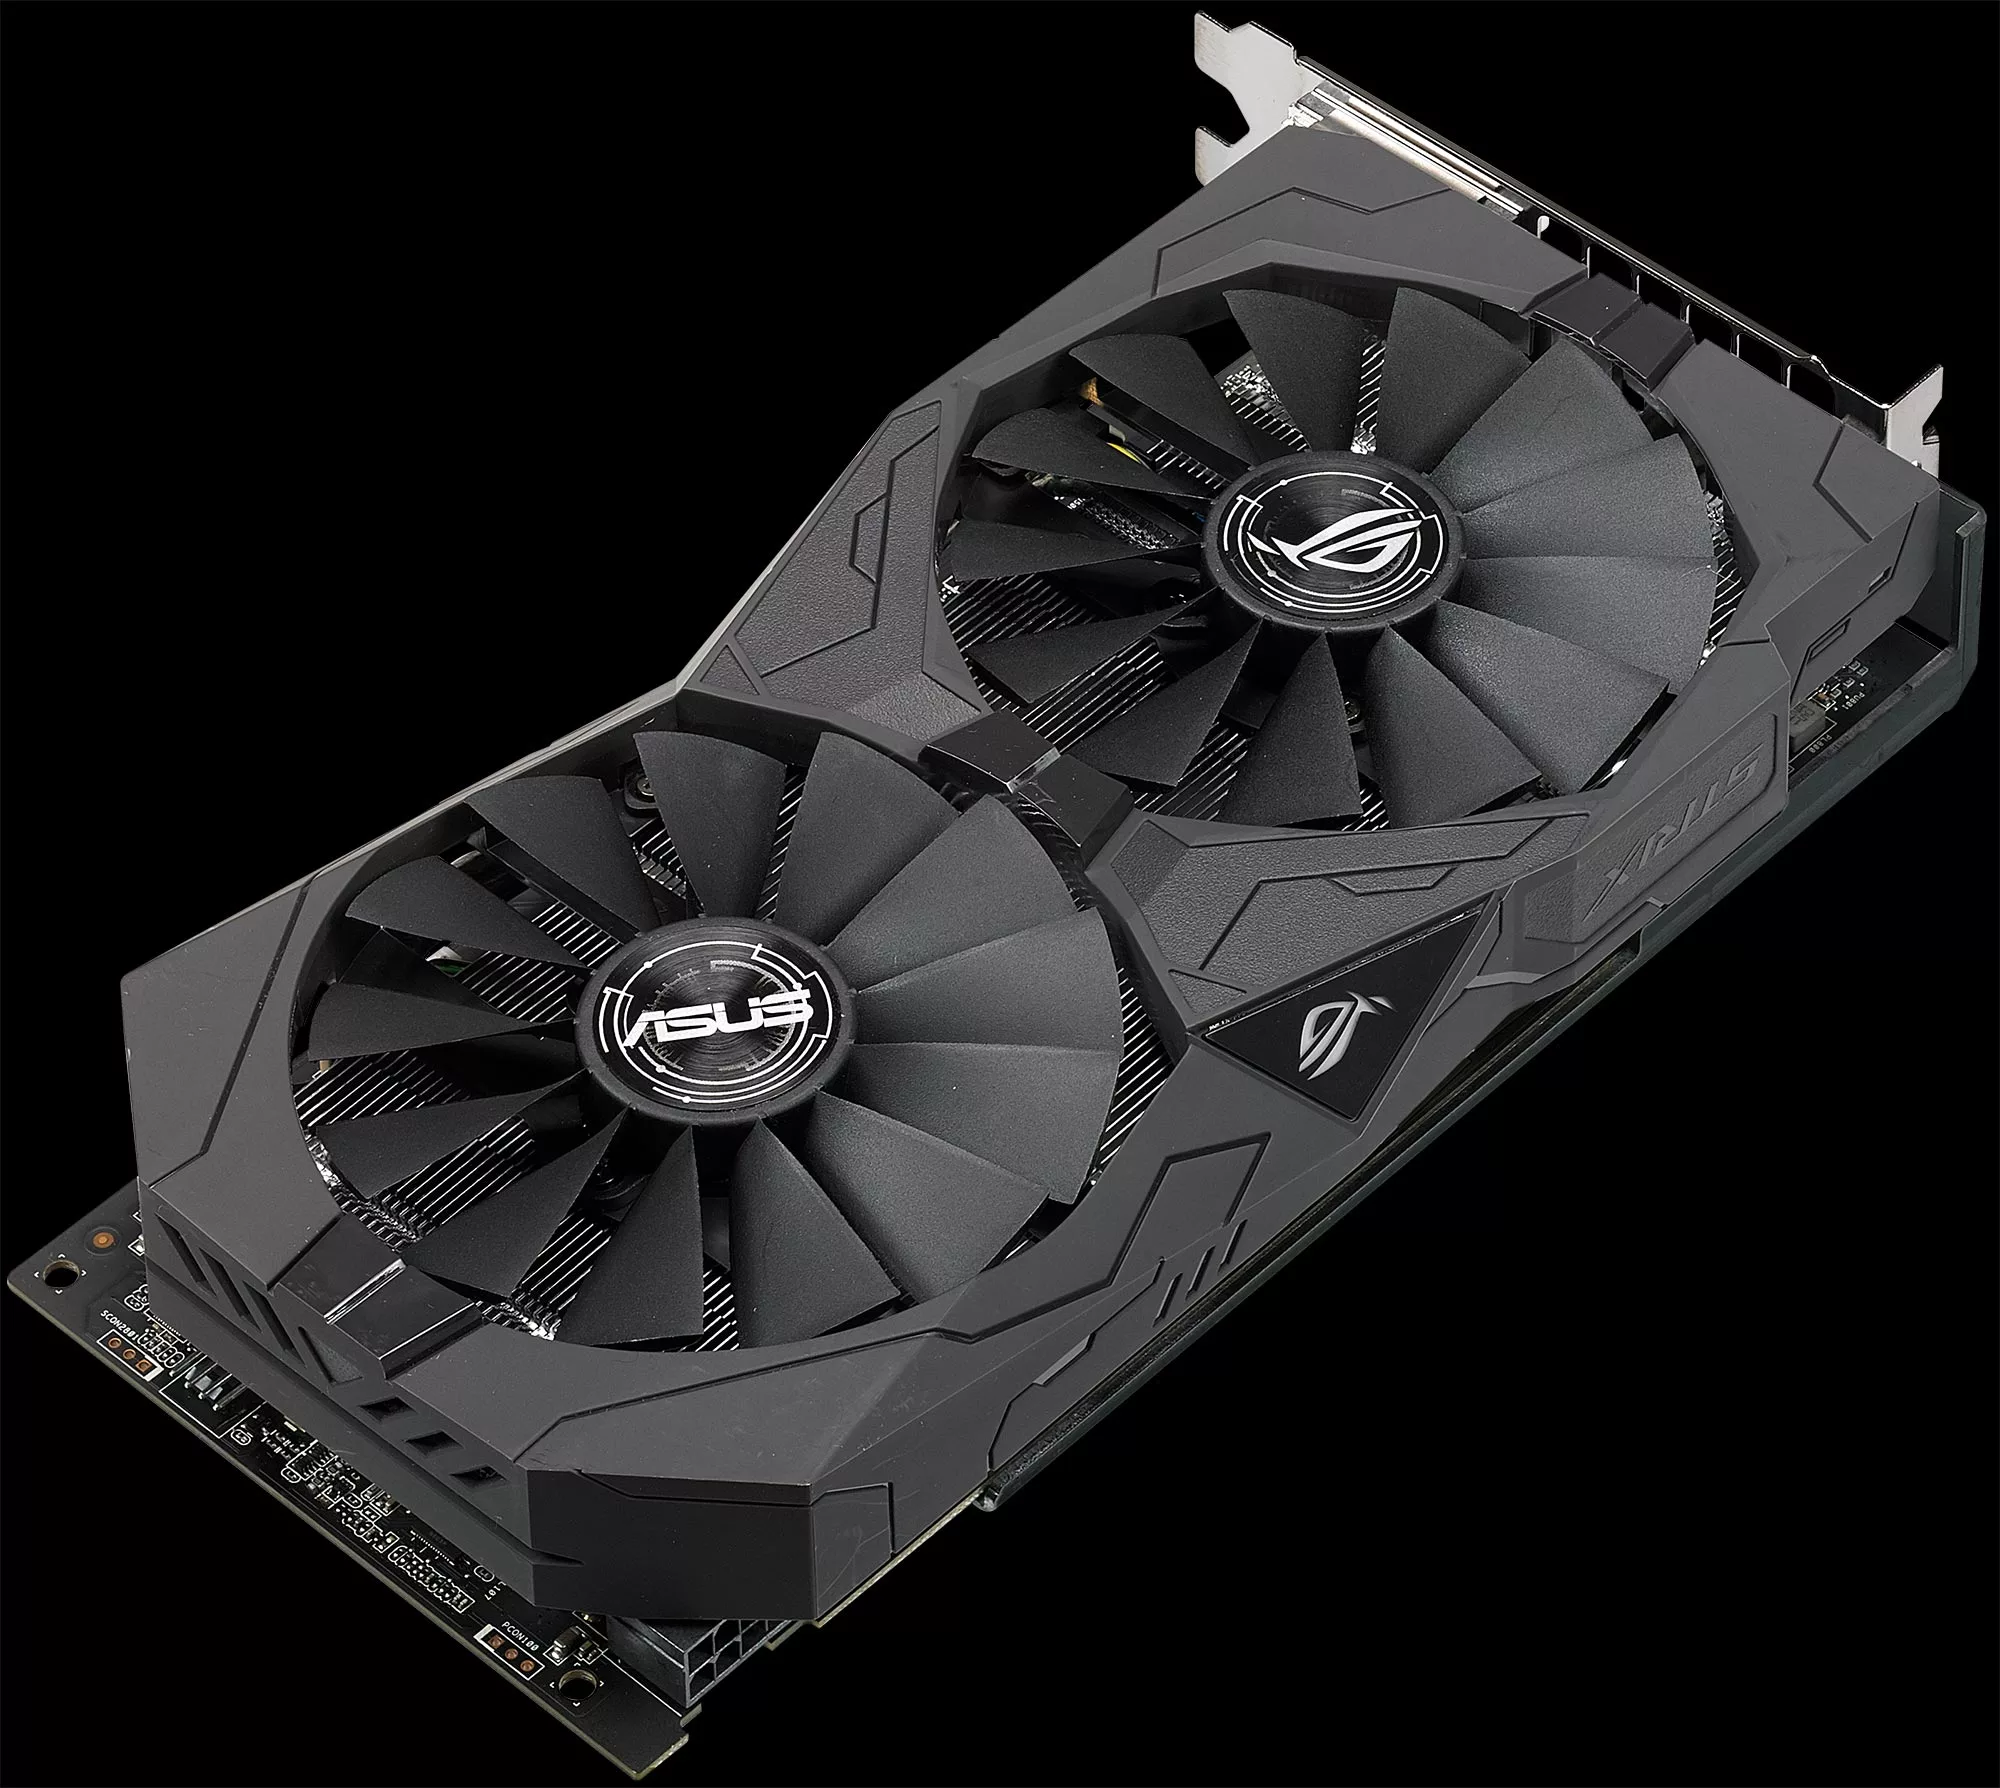 Introducing the ROG Strix Radeon RX 580 and 570 graphics cards | ROG -  Republic of Gamers Global